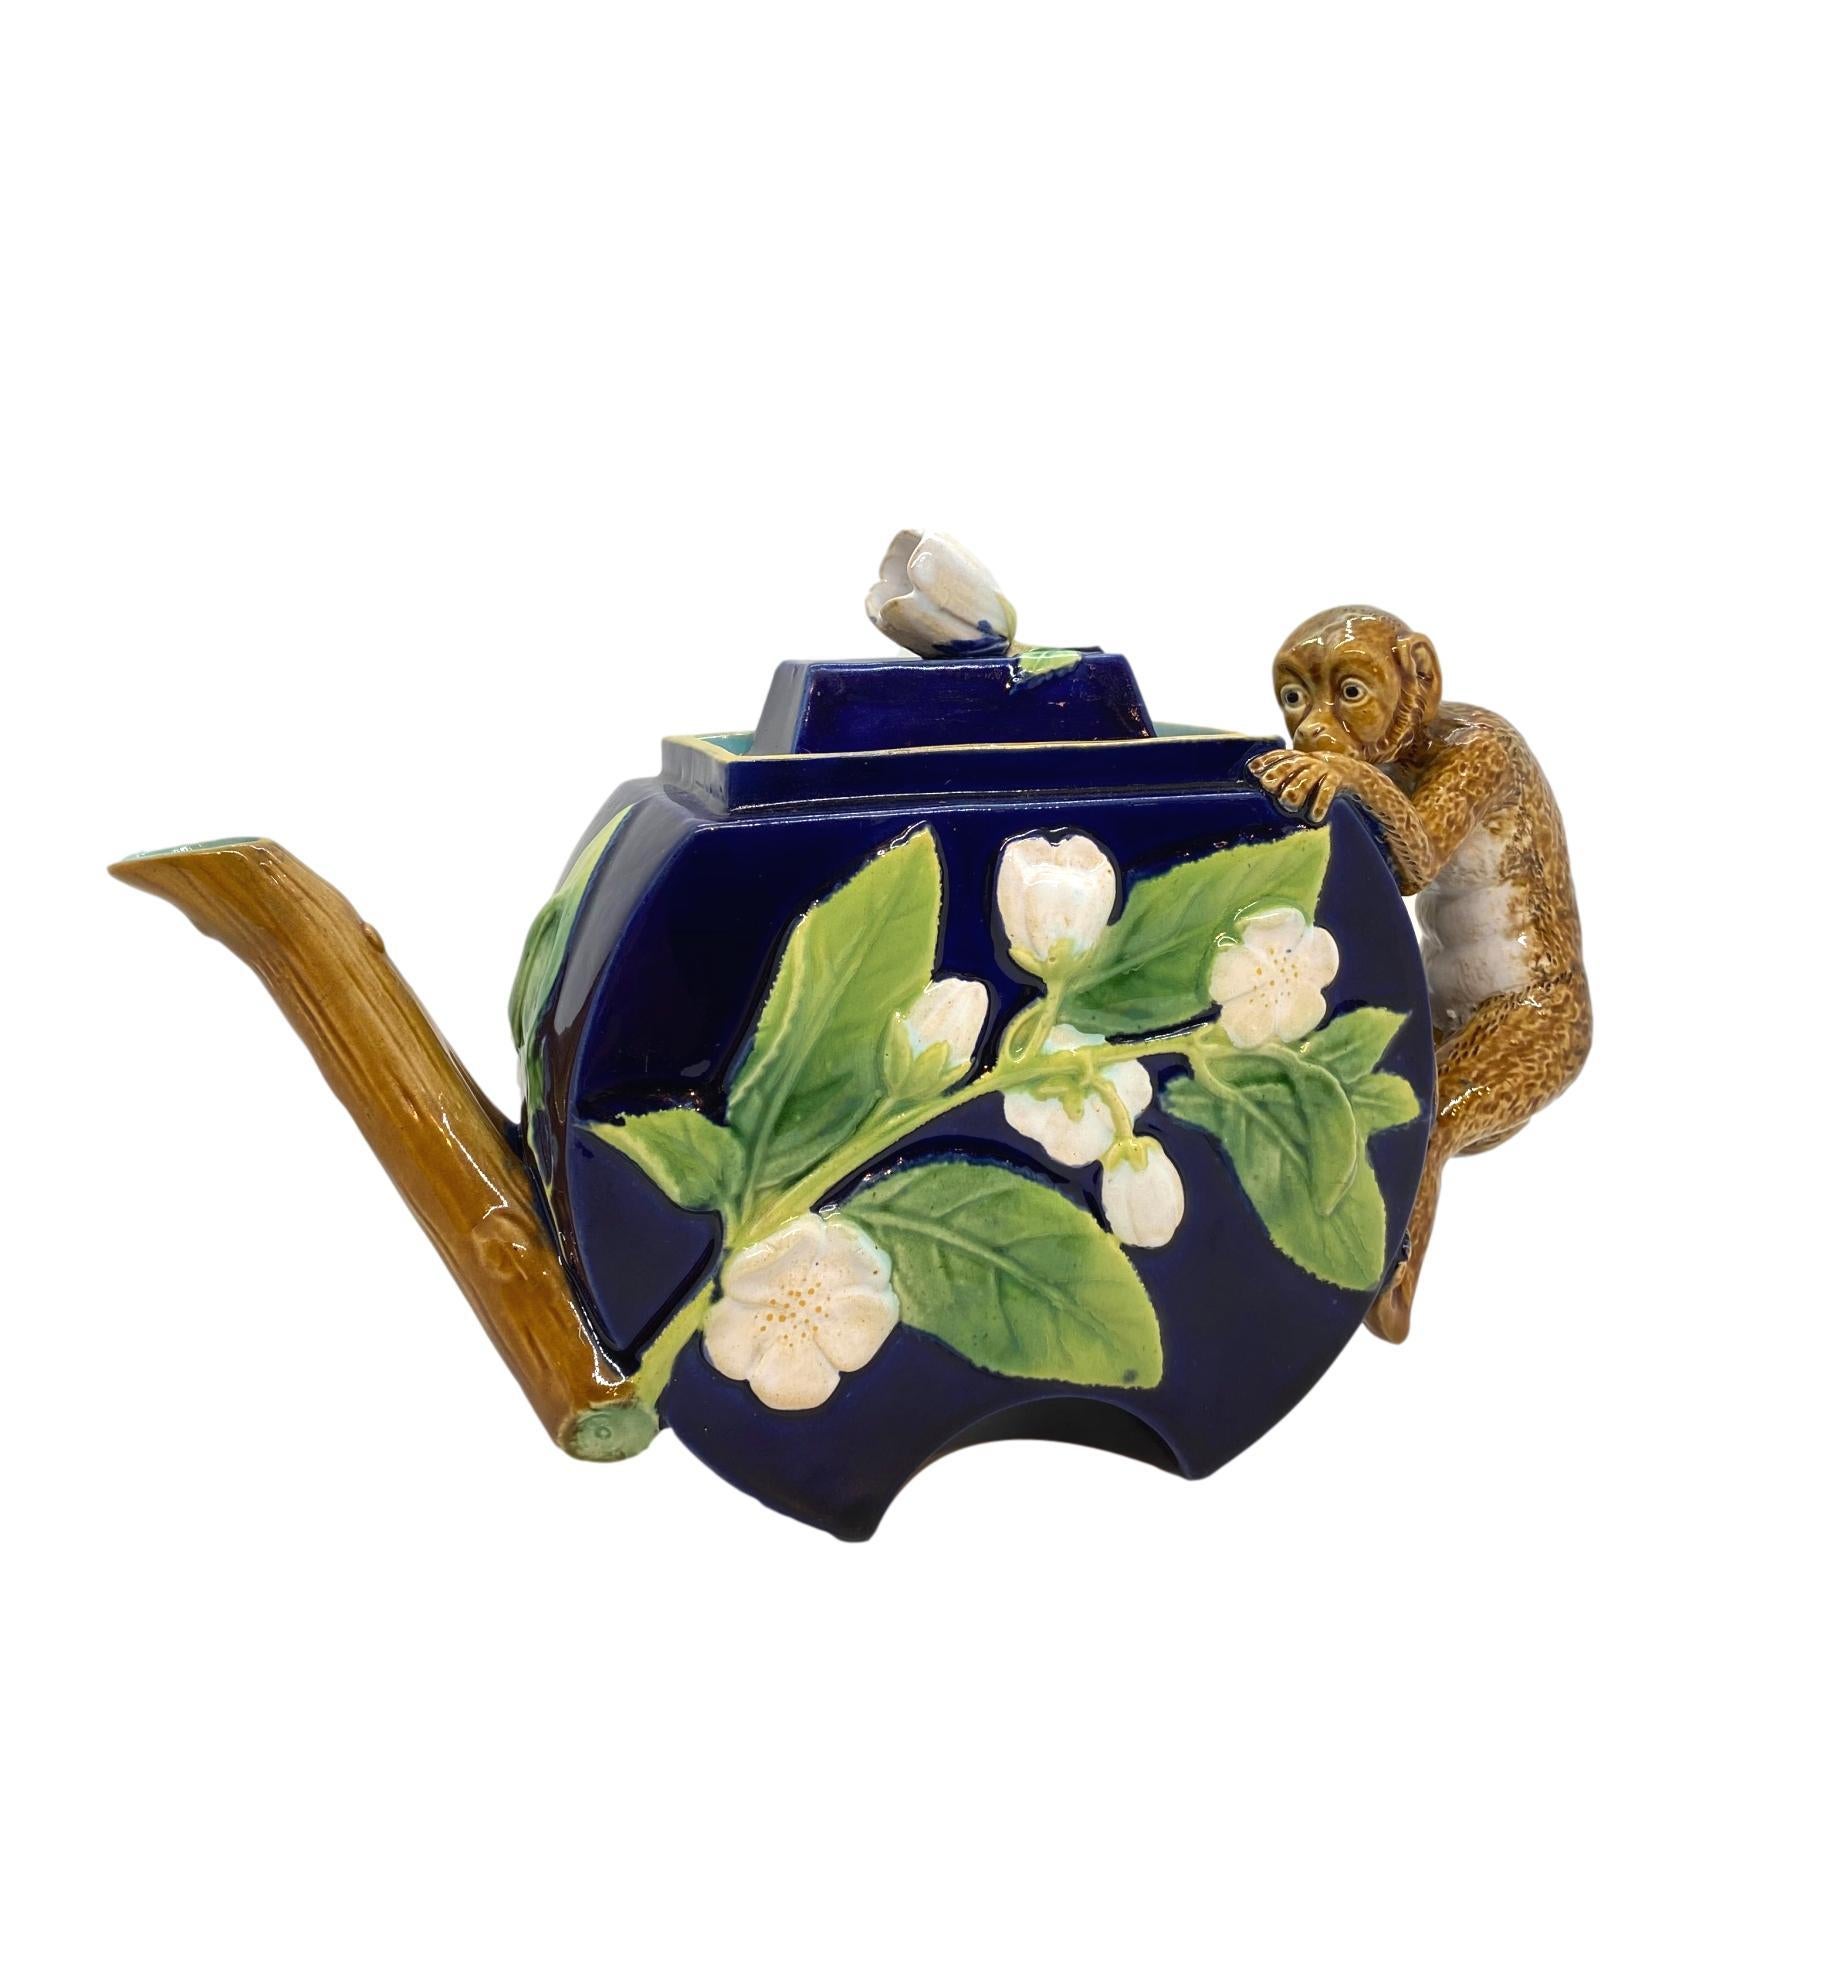 George Jones majolica monkey teapot in cobalt blue, English, ca. 1875 of crescent shape, with relief molded blossoming branches, with a bud forming the knop, the handle formed by a comical monkey. 
Design number 3450; design registered: 26 June